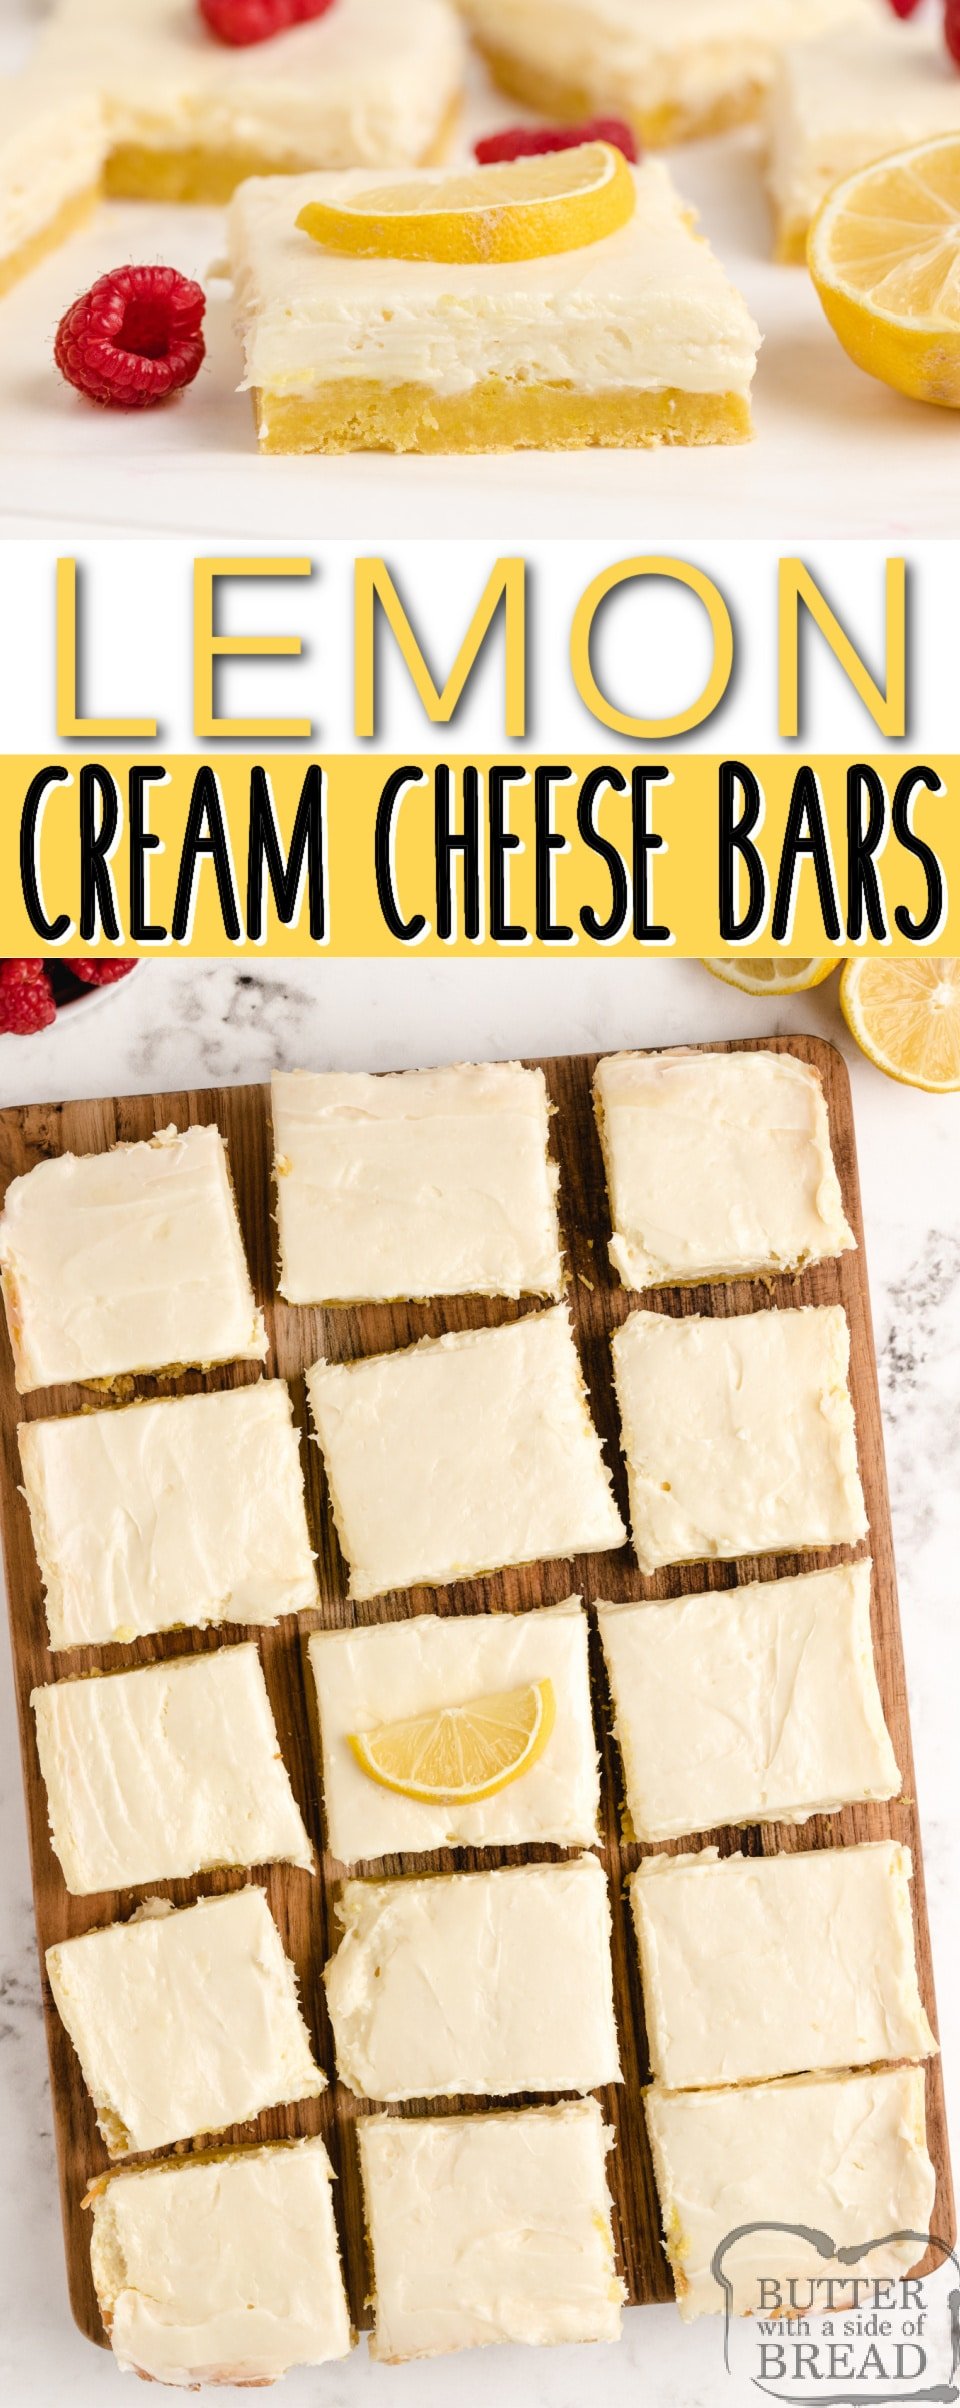 Lemon Cream Cheese Bars with a lemon cake mix crust, a vanilla cream cheese filling and a lemon cream cheese topping. Simple and delicious layered lemon bar recipe!